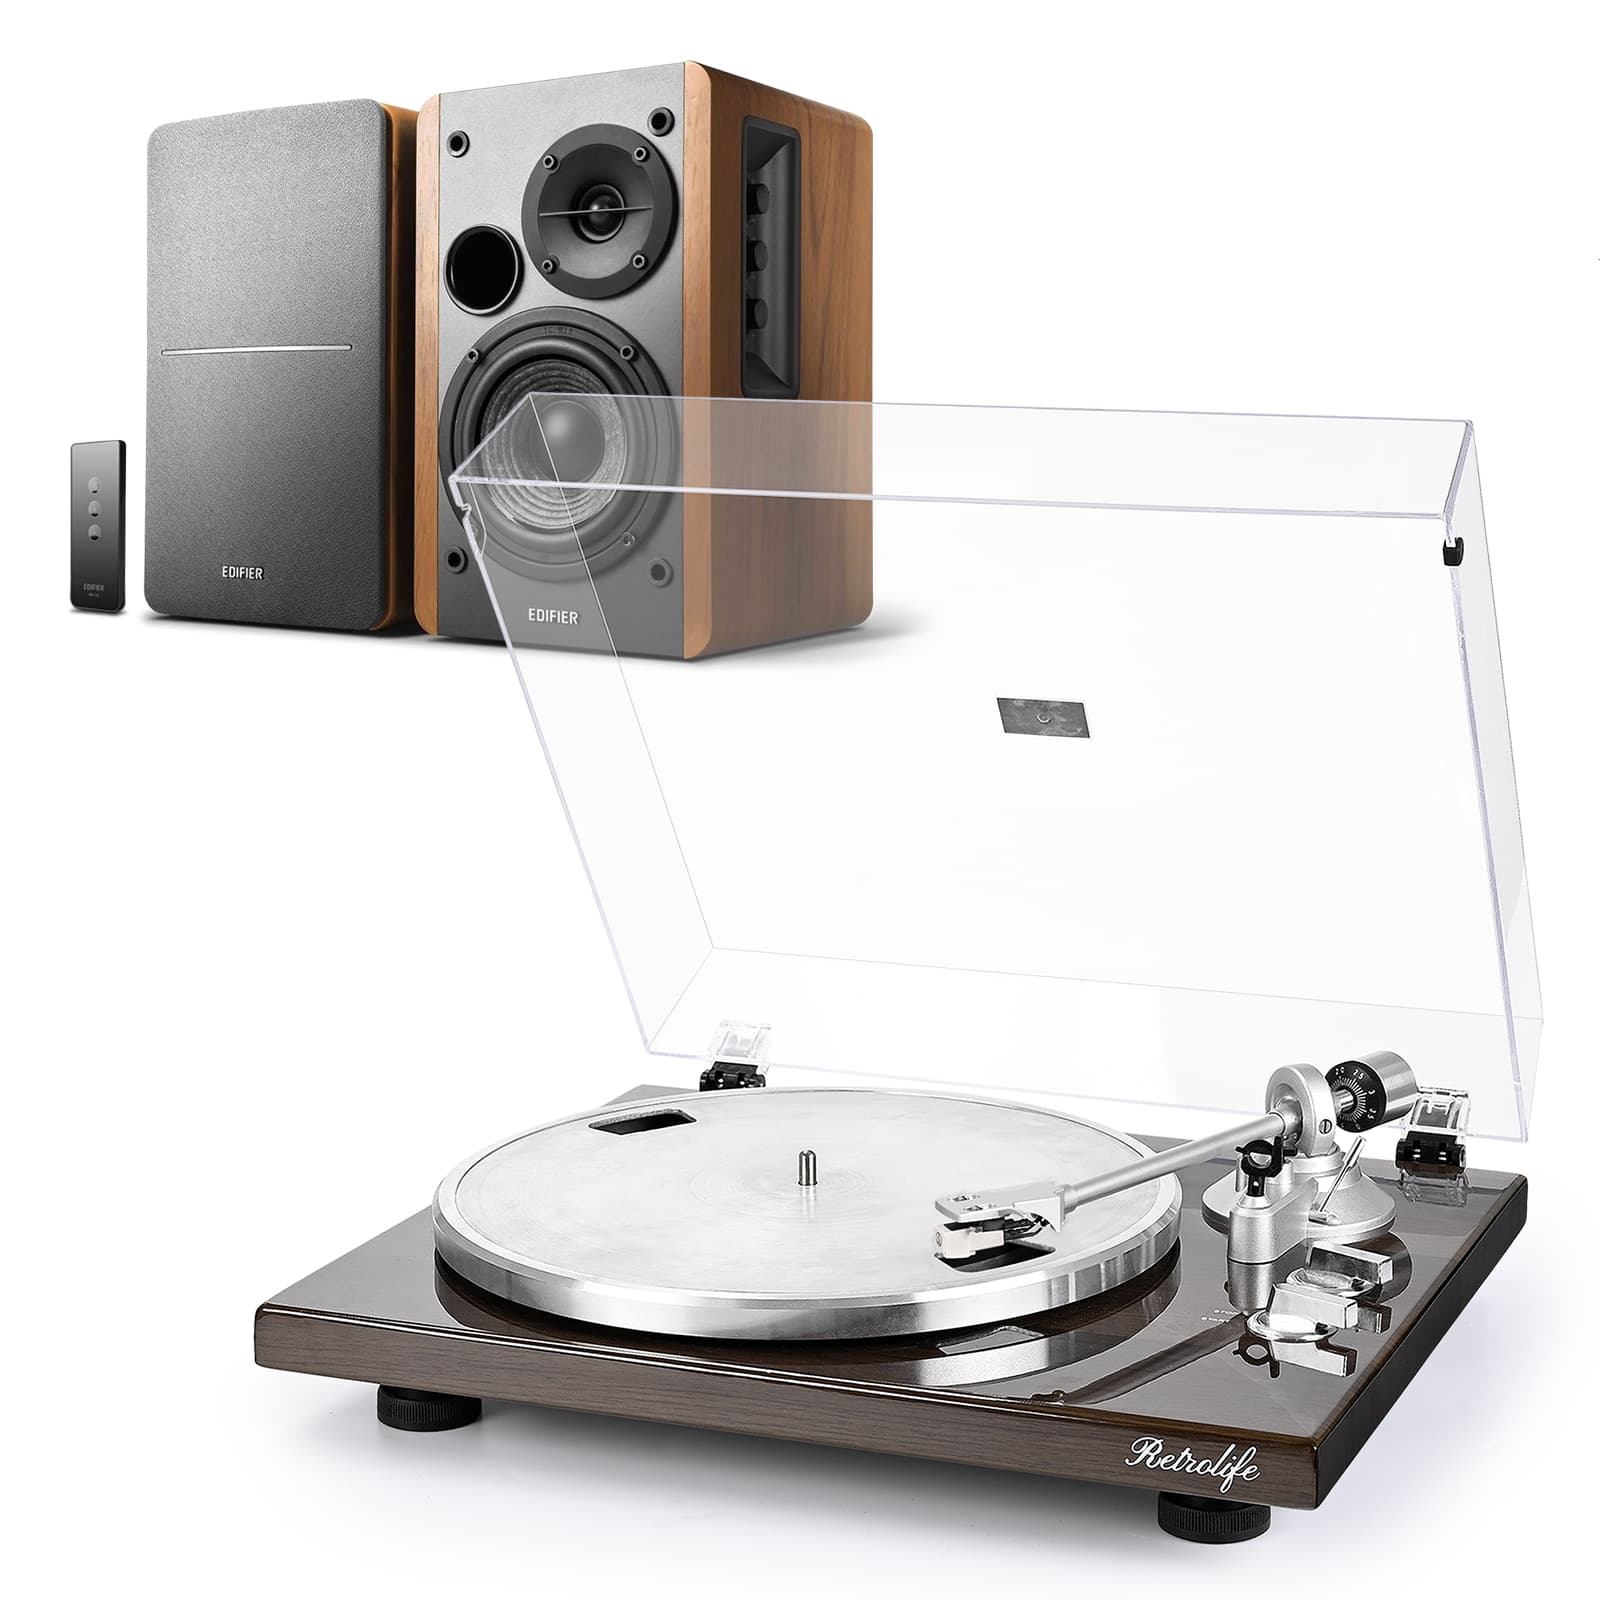 HQKZ-006 High Fidelity Turntable with Edifier R1280T 42W Studio Monitor Powered Speakers